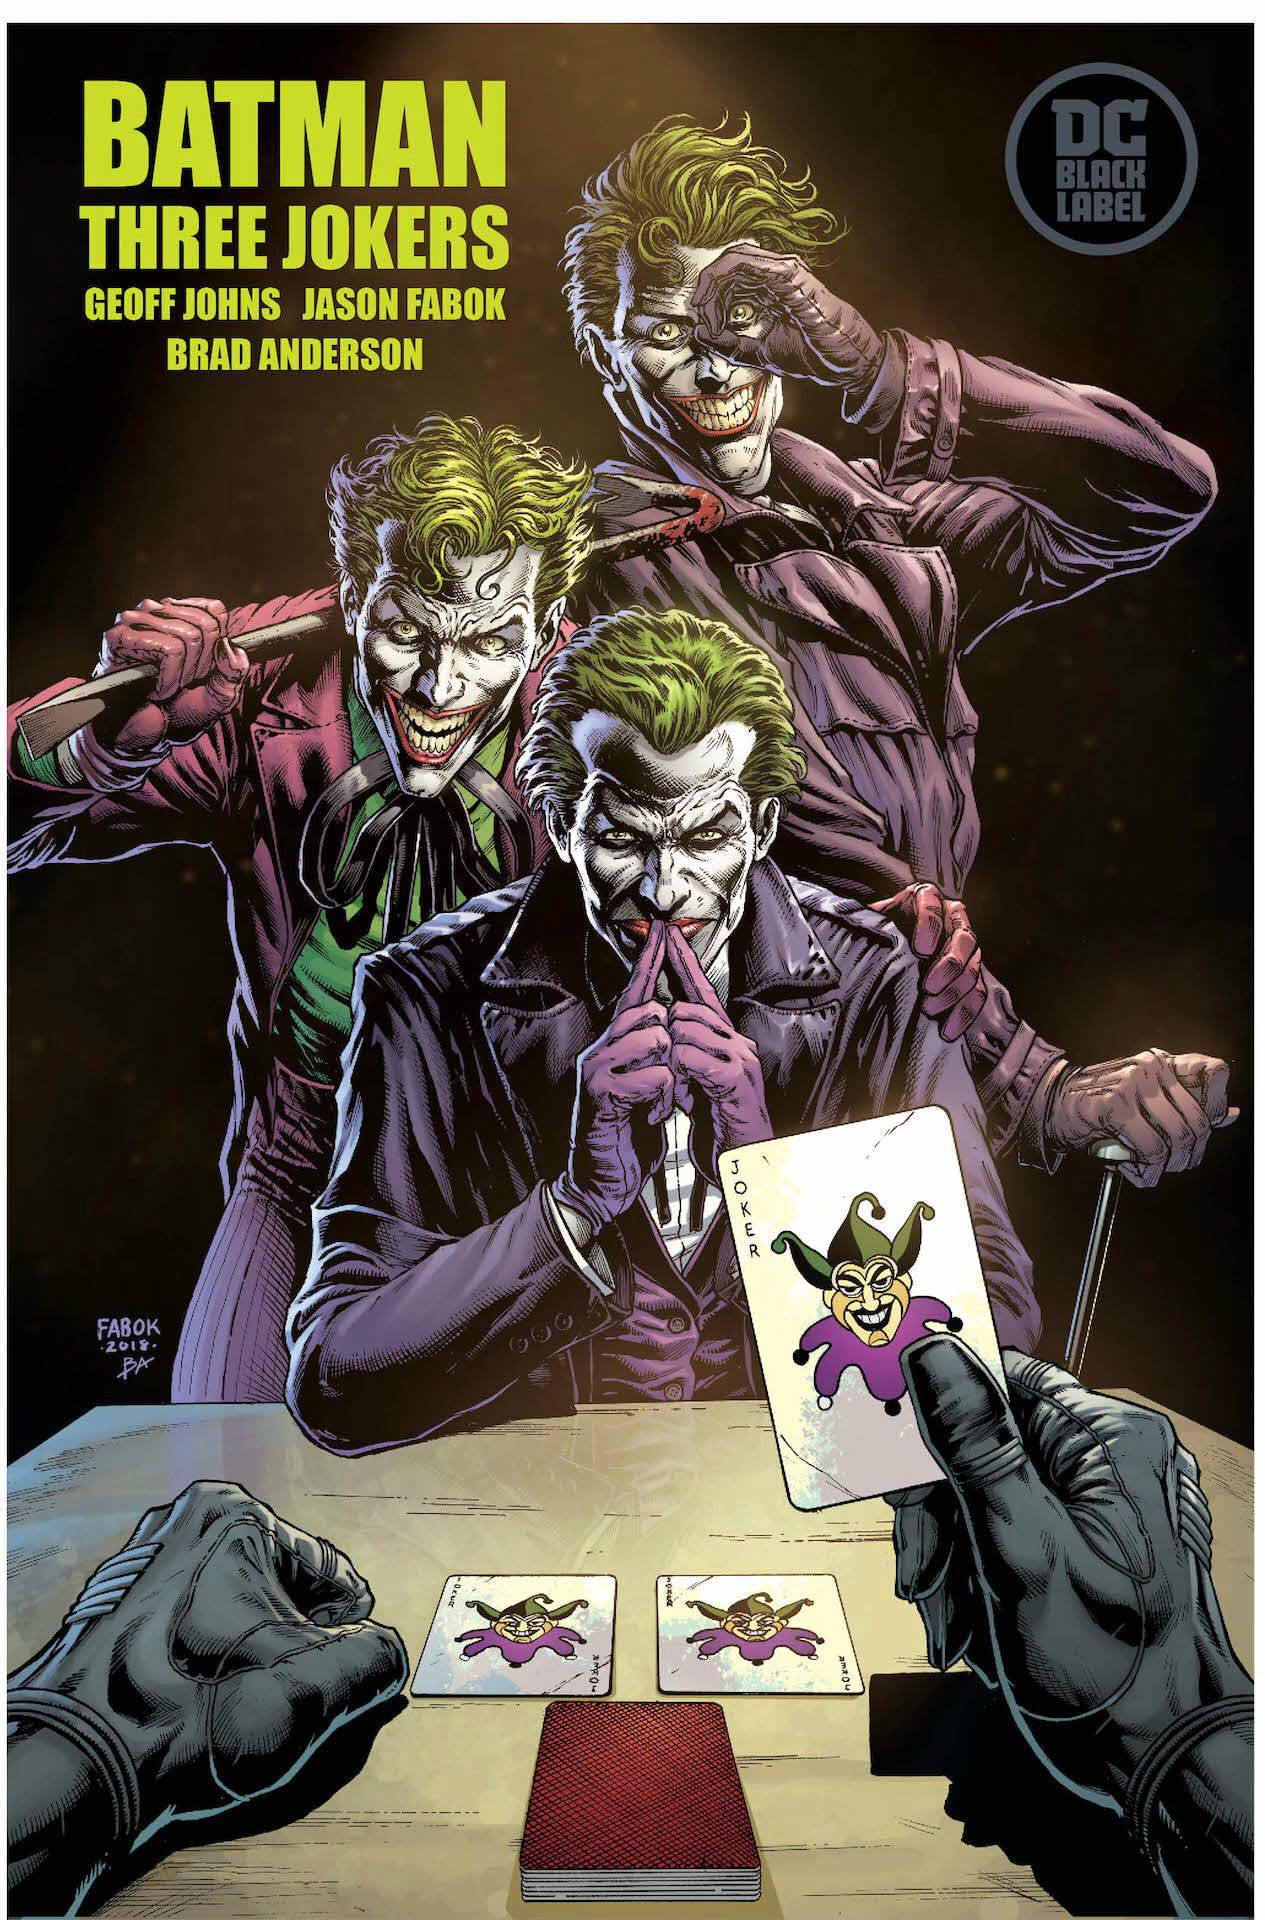 DC’s Batman: Three Jokers First Look & Details Revealed at Comic-Con